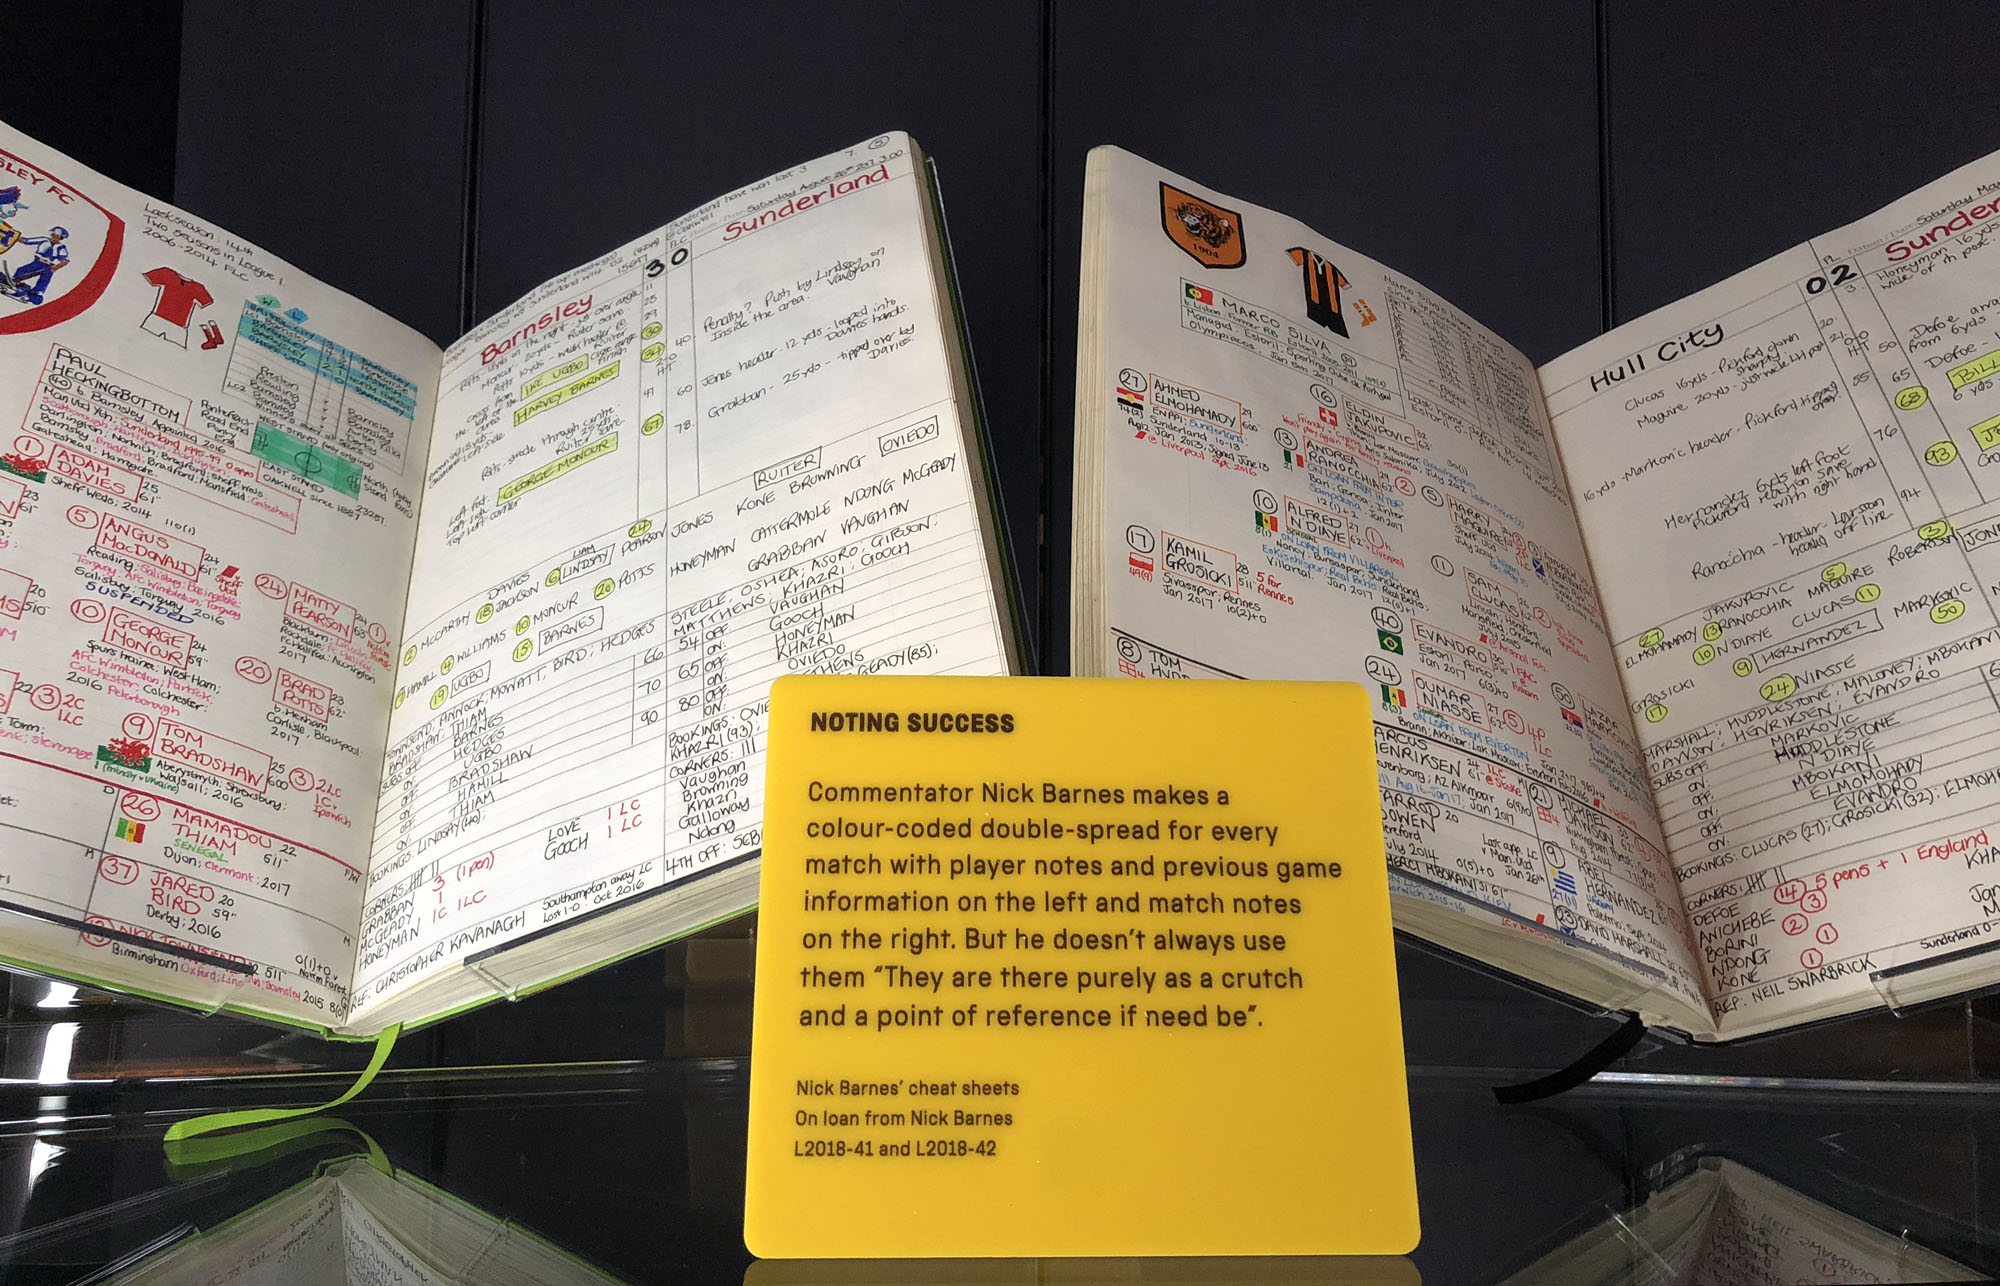 Annotated notebooks belonging to sports commentator Nick Barnes